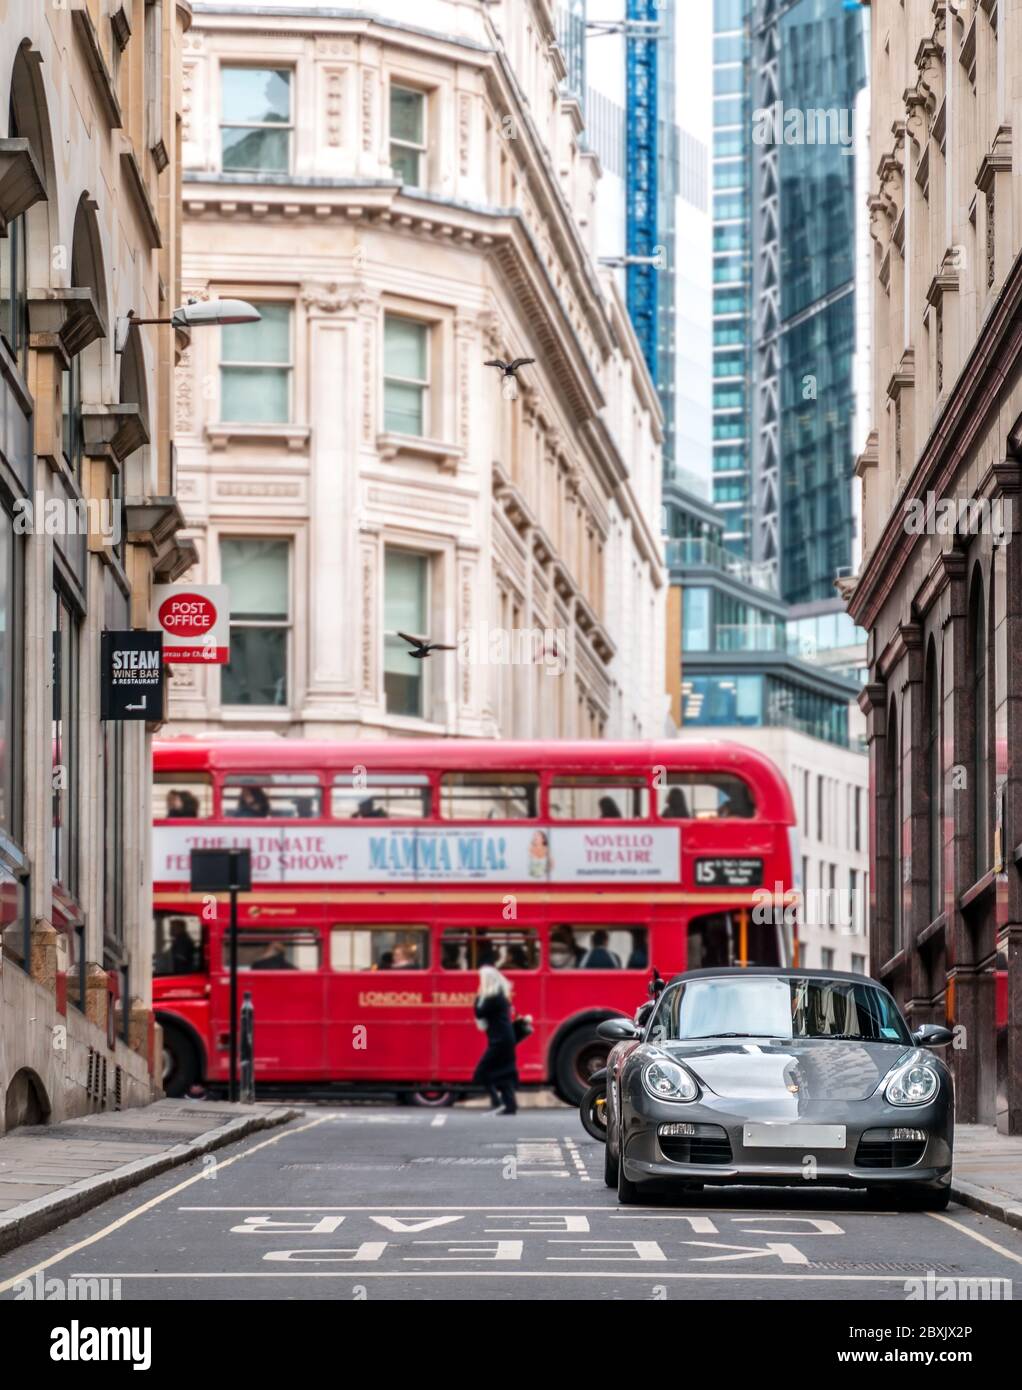 London - 02 March 2019 - Red Bus and Central London Street Scene, London UK Stock Photo